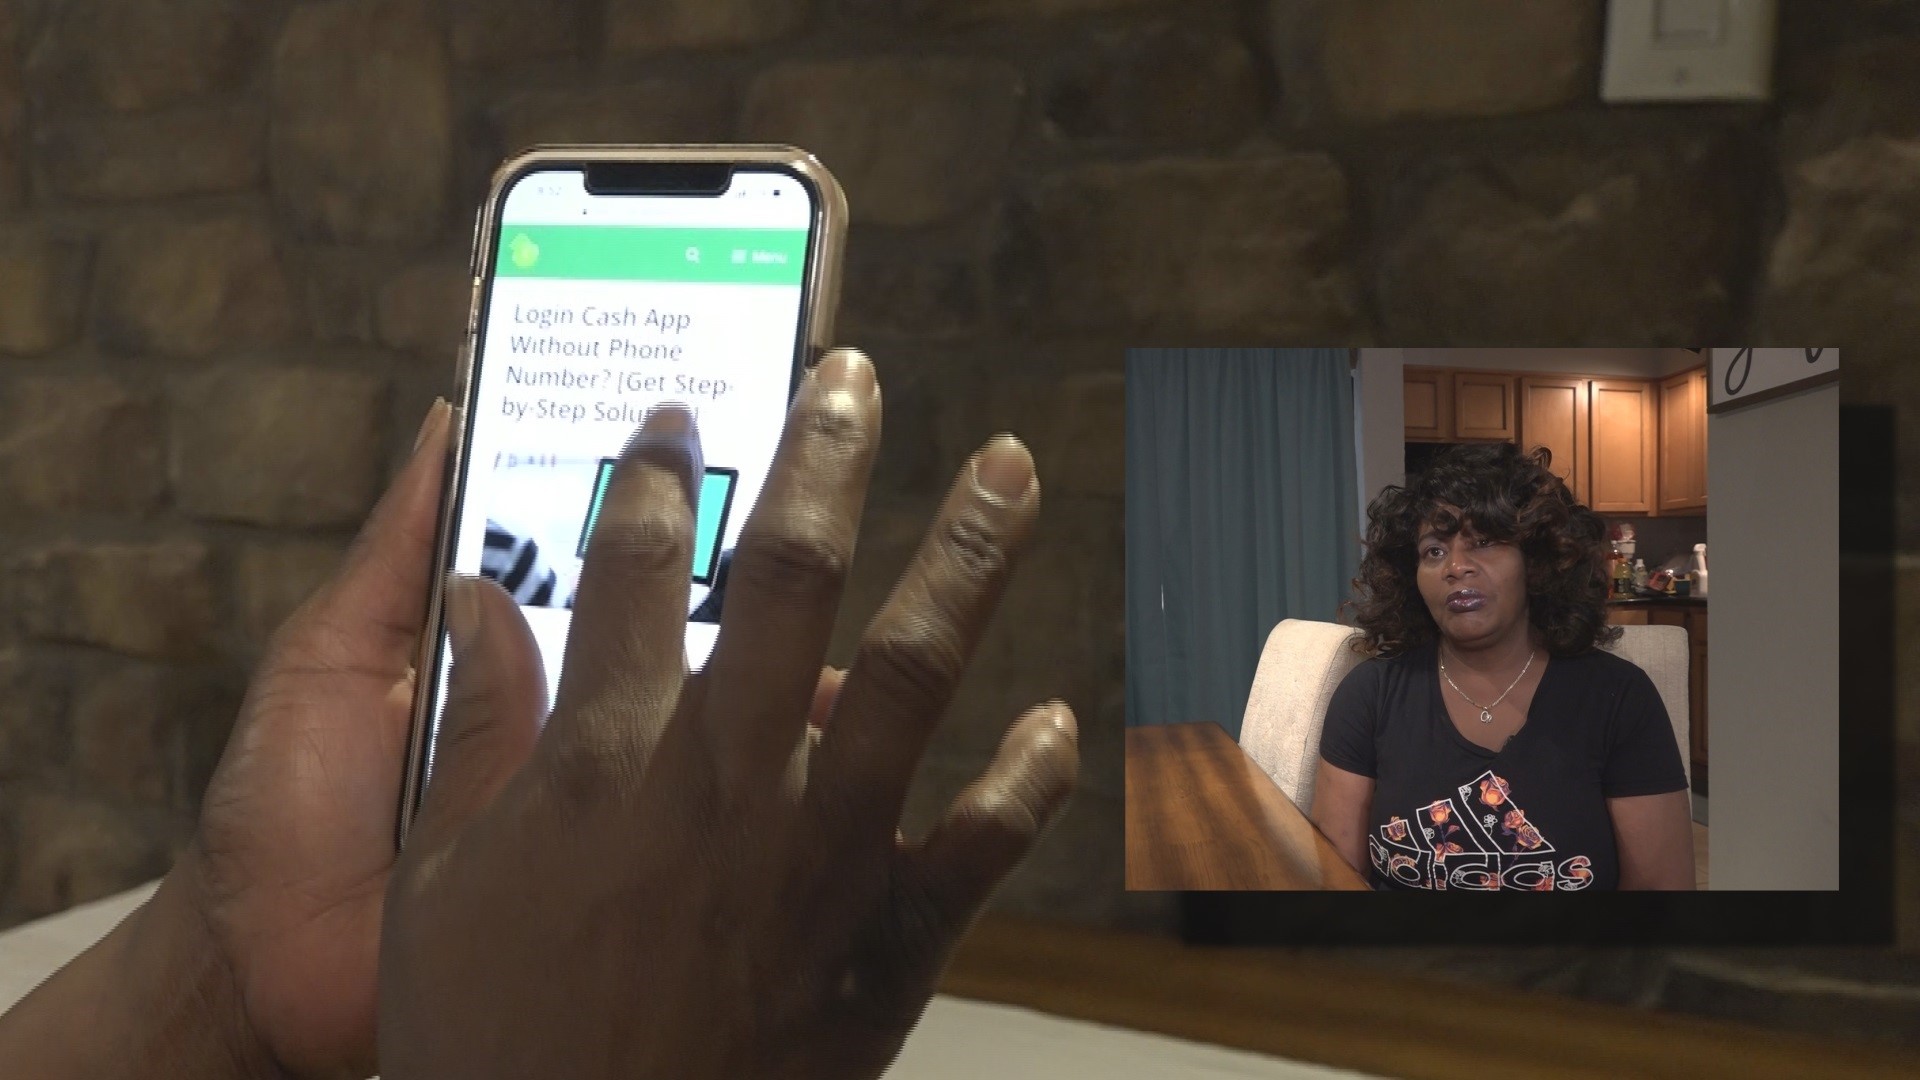 A Scottsdale nurse is still figuring out how to pay her bills after she was scammed out of $3,406. Regina Smith thought she was using Cash App when she was scammed.